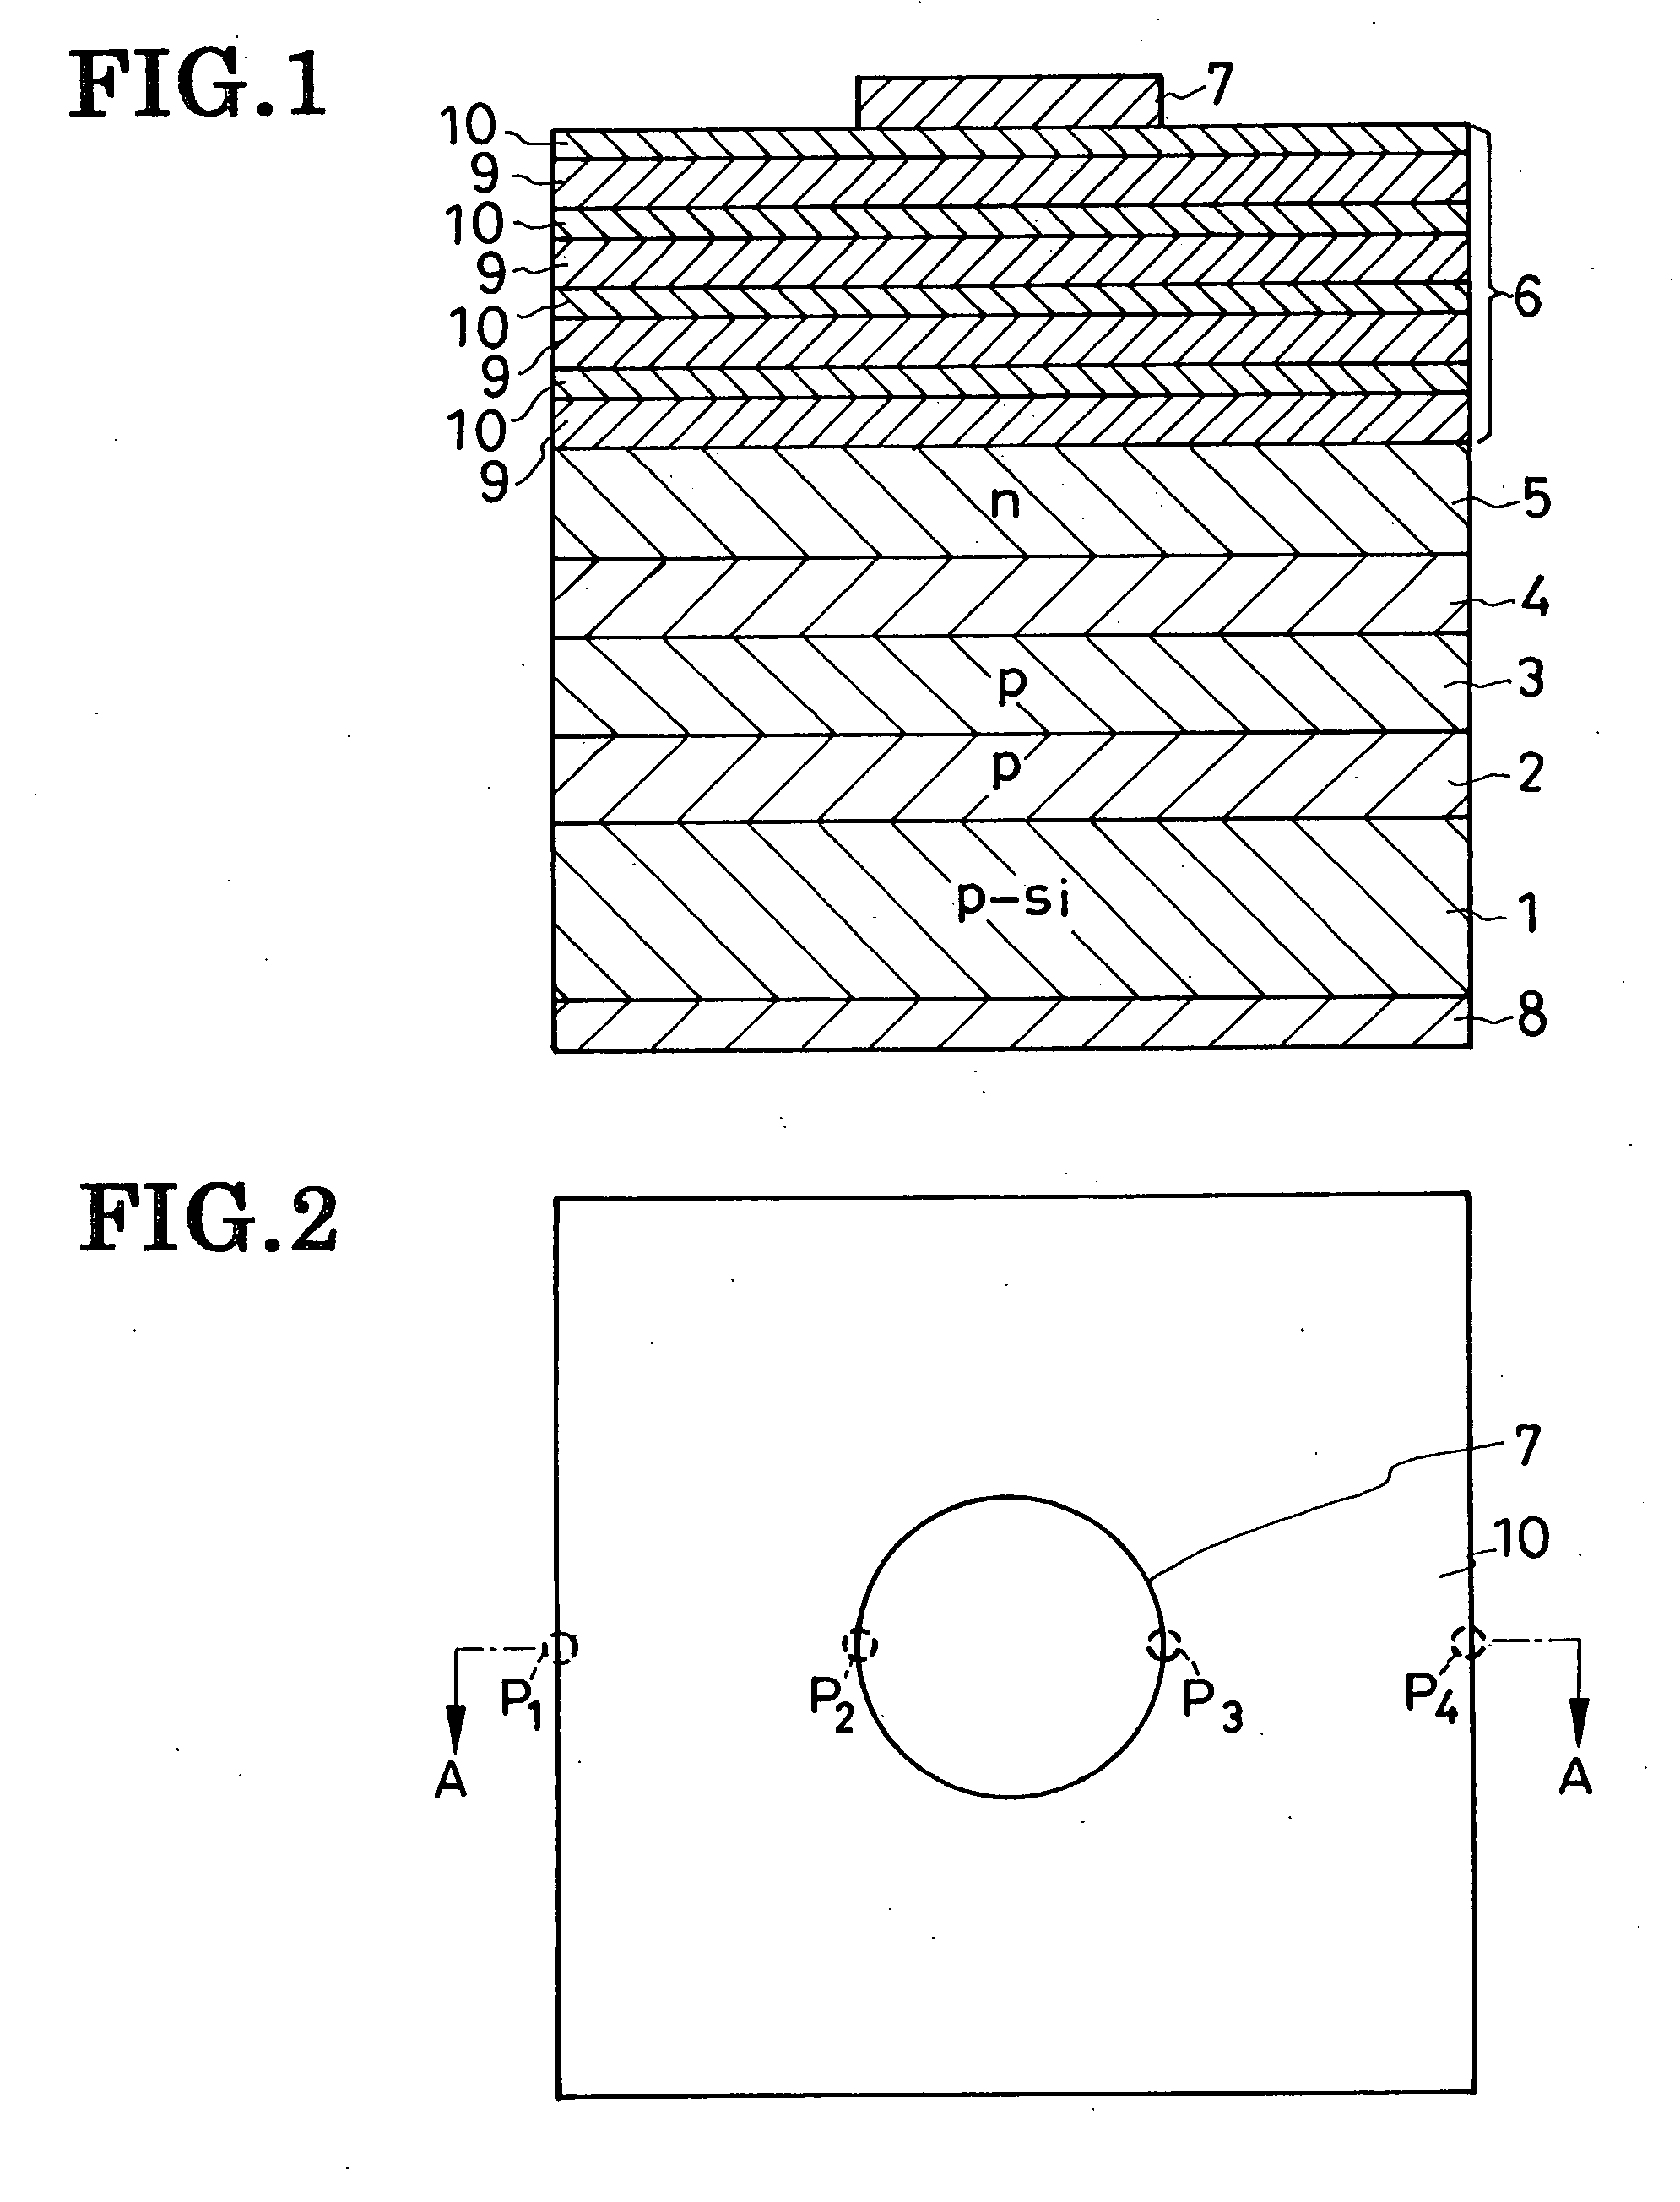 Light-emitting semiconductor device and method of fabrication